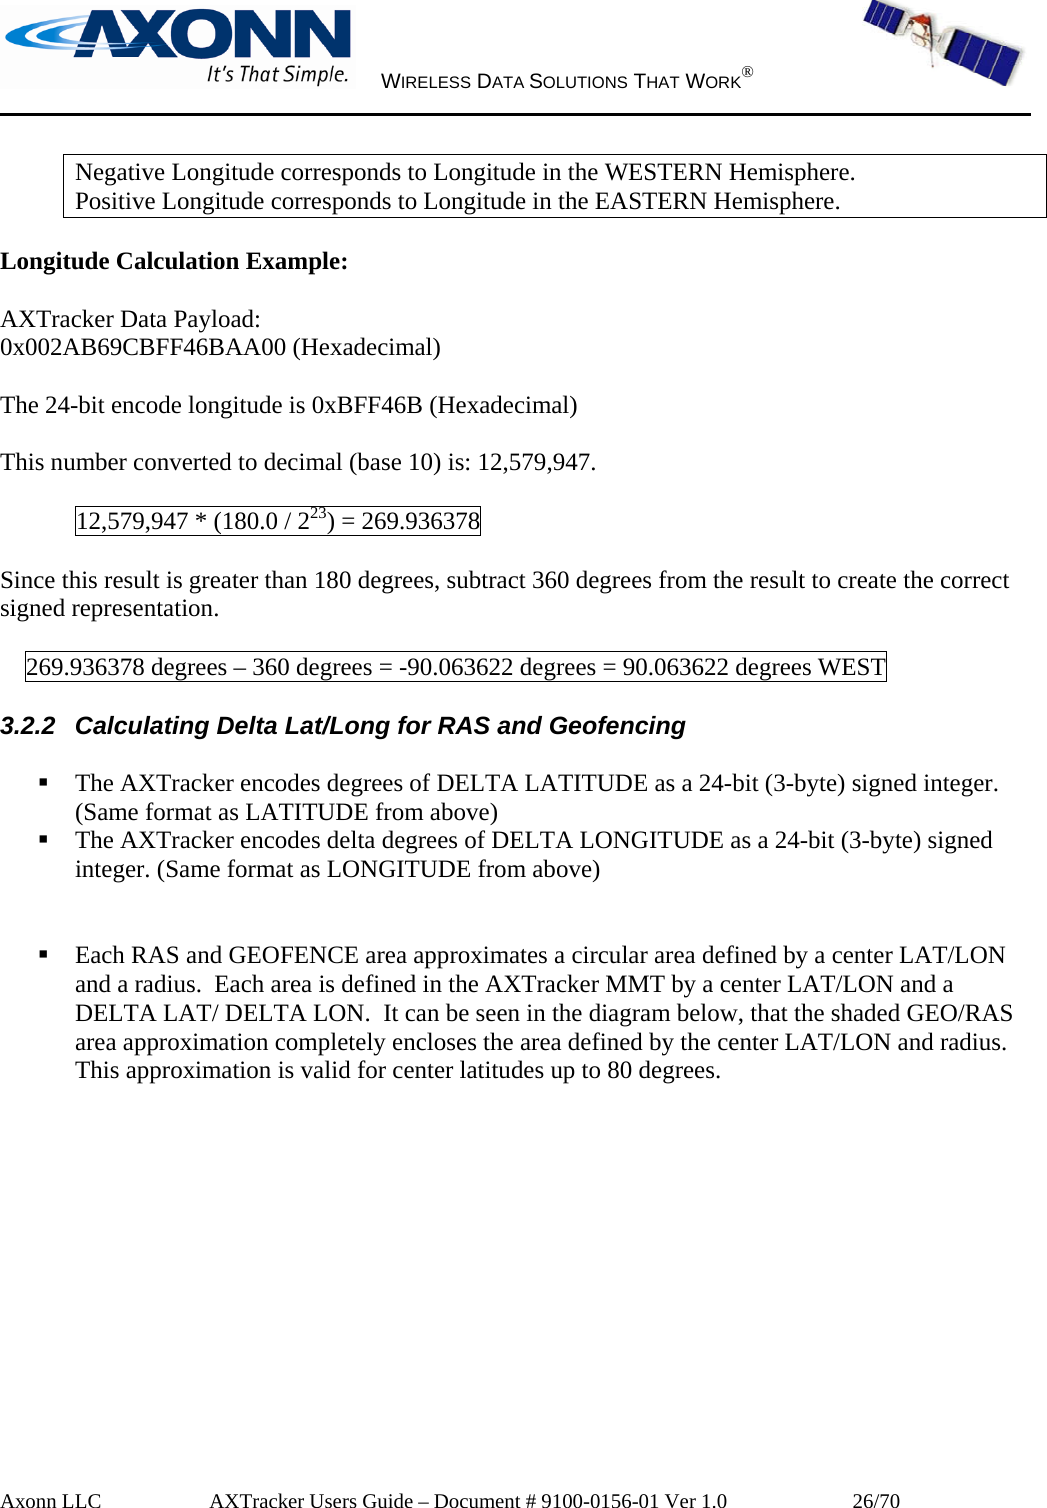     WIRELESS DATA SOLUTIONS THAT WORK®   Axonn LLC         AXTracker Users Guide – Document # 9100-0156-01 Ver 1.0                  26/70  Negative Longitude corresponds to Longitude in the WESTERN Hemisphere. Positive Longitude corresponds to Longitude in the EASTERN Hemisphere.  Longitude Calculation Example:  AXTracker Data Payload: 0x002AB69CBFF46BAA00 (Hexadecimal)   The 24-bit encode longitude is 0xBFF46B (Hexadecimal)  This number converted to decimal (base 10) is: 12,579,947.  12,579,947 * (180.0 / 223) = 269.936378     Since this result is greater than 180 degrees, subtract 360 degrees from the result to create the correct signed representation.      269.936378 degrees – 360 degrees = -90.063622 degrees = 90.063622 degrees WEST                                  3.2.2  Calculating Delta Lat/Long for RAS and Geofencing   The AXTracker encodes degrees of DELTA LATITUDE as a 24-bit (3-byte) signed integer. (Same format as LATITUDE from above)  The AXTracker encodes delta degrees of DELTA LONGITUDE as a 24-bit (3-byte) signed integer. (Same format as LONGITUDE from above)    Each RAS and GEOFENCE area approximates a circular area defined by a center LAT/LON and a radius.  Each area is defined in the AXTracker MMT by a center LAT/LON and a DELTA LAT/ DELTA LON.  It can be seen in the diagram below, that the shaded GEO/RAS area approximation completely encloses the area defined by the center LAT/LON and radius. This approximation is valid for center latitudes up to 80 degrees.  